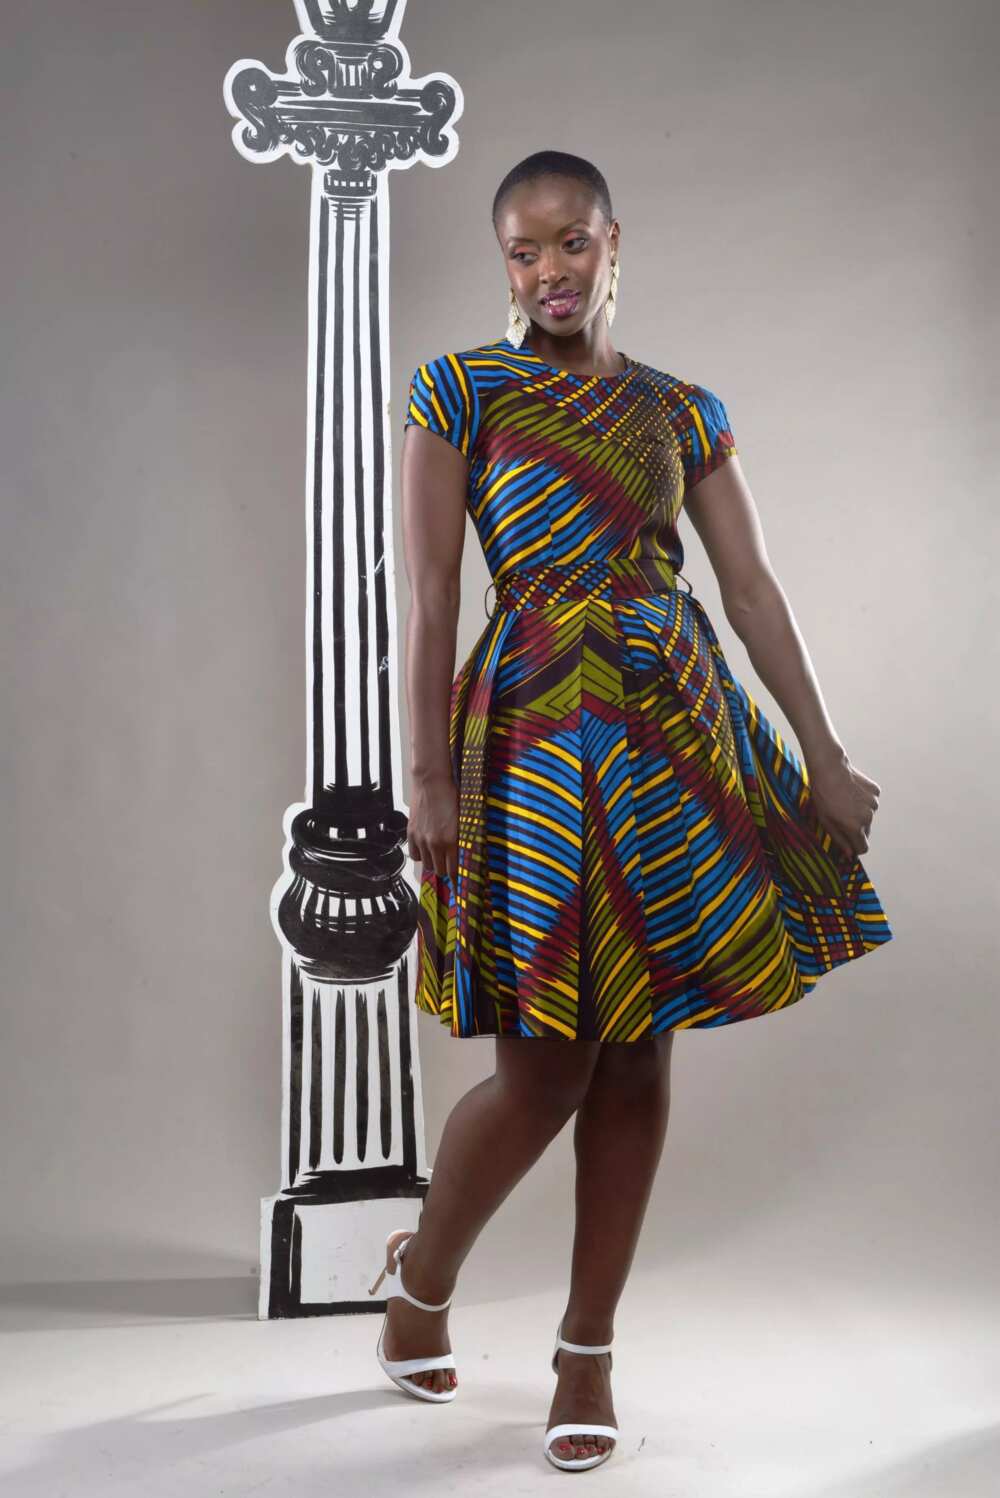 Flowing gowns made with ankara to rock in 2018